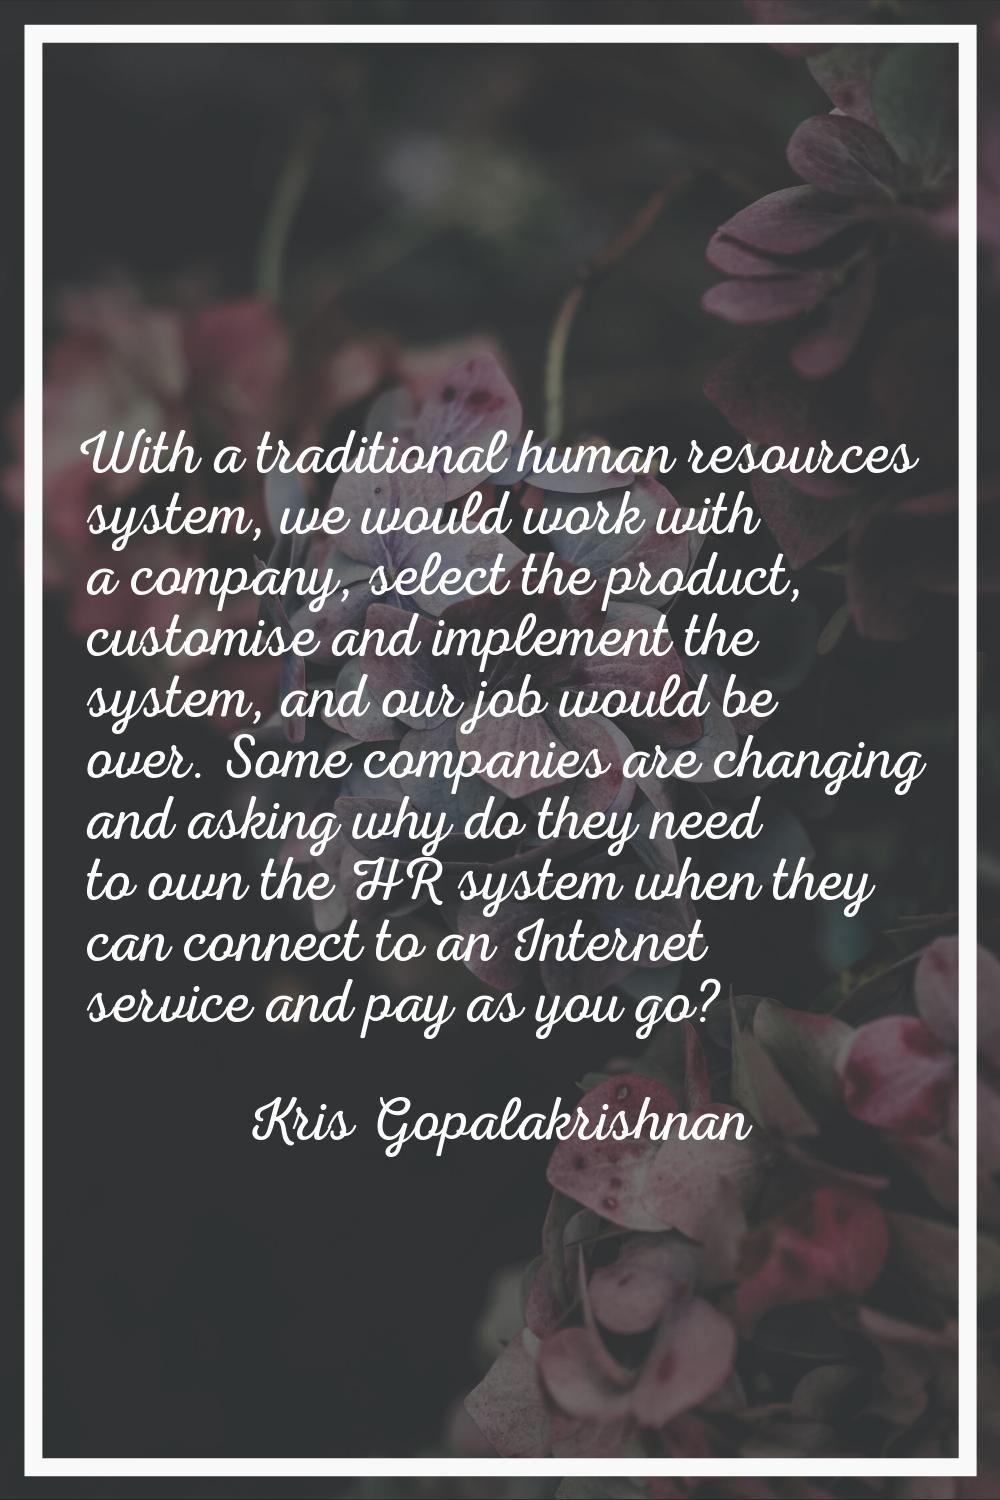 With a traditional human resources system, we would work with a company, select the product, custom